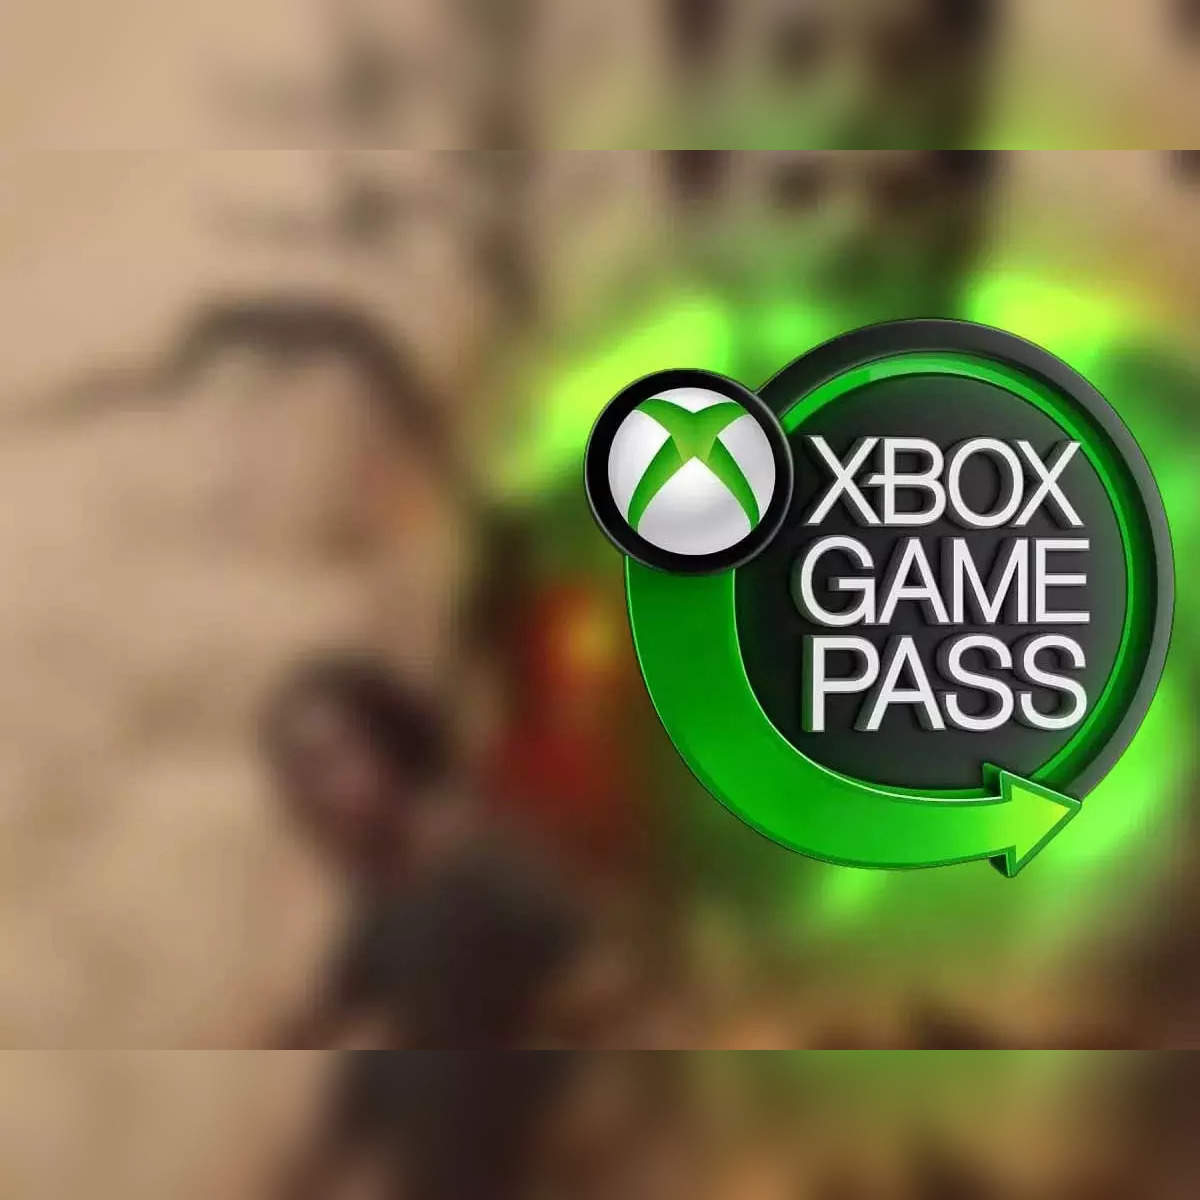 Xbox Game Pass: What You Need to Know